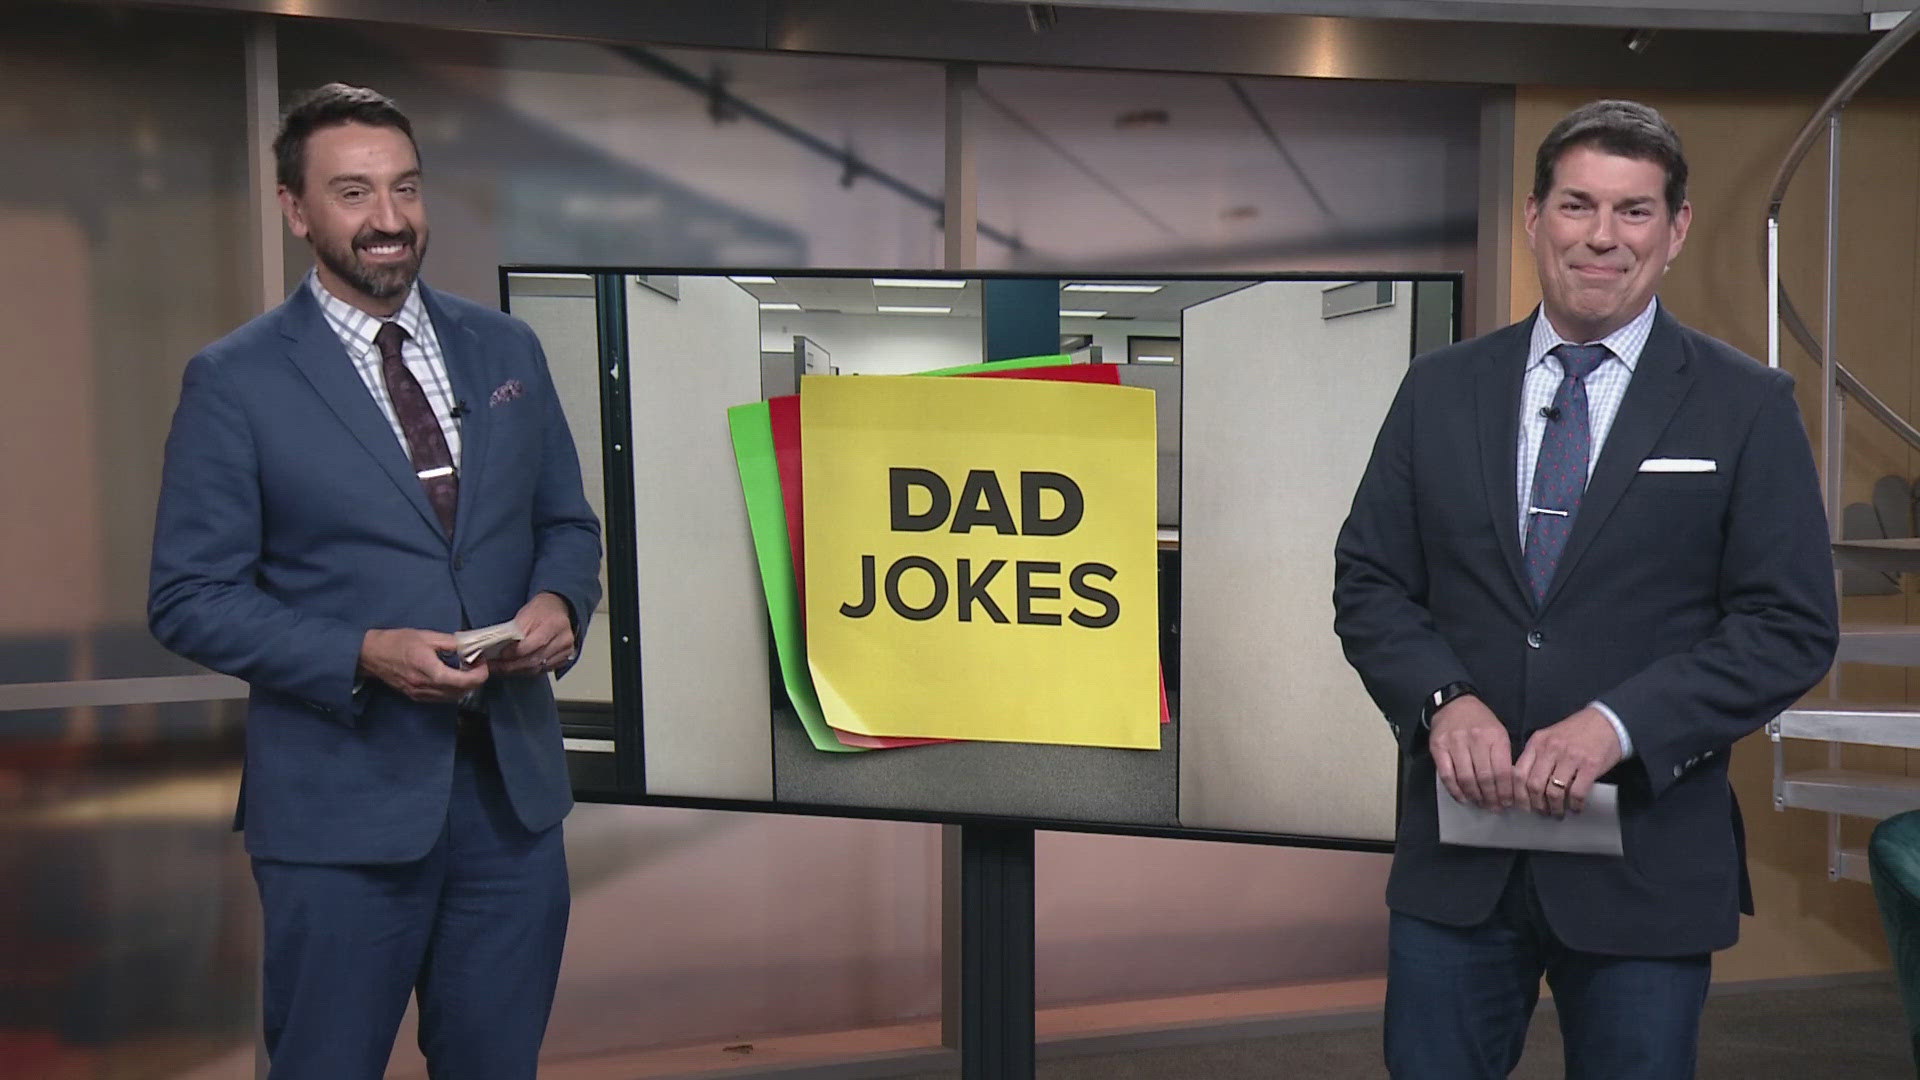 Get ready for a good laugh! We have more dad jokes with Matt Wintz and Dave Chudowsky for Friday, April 26.